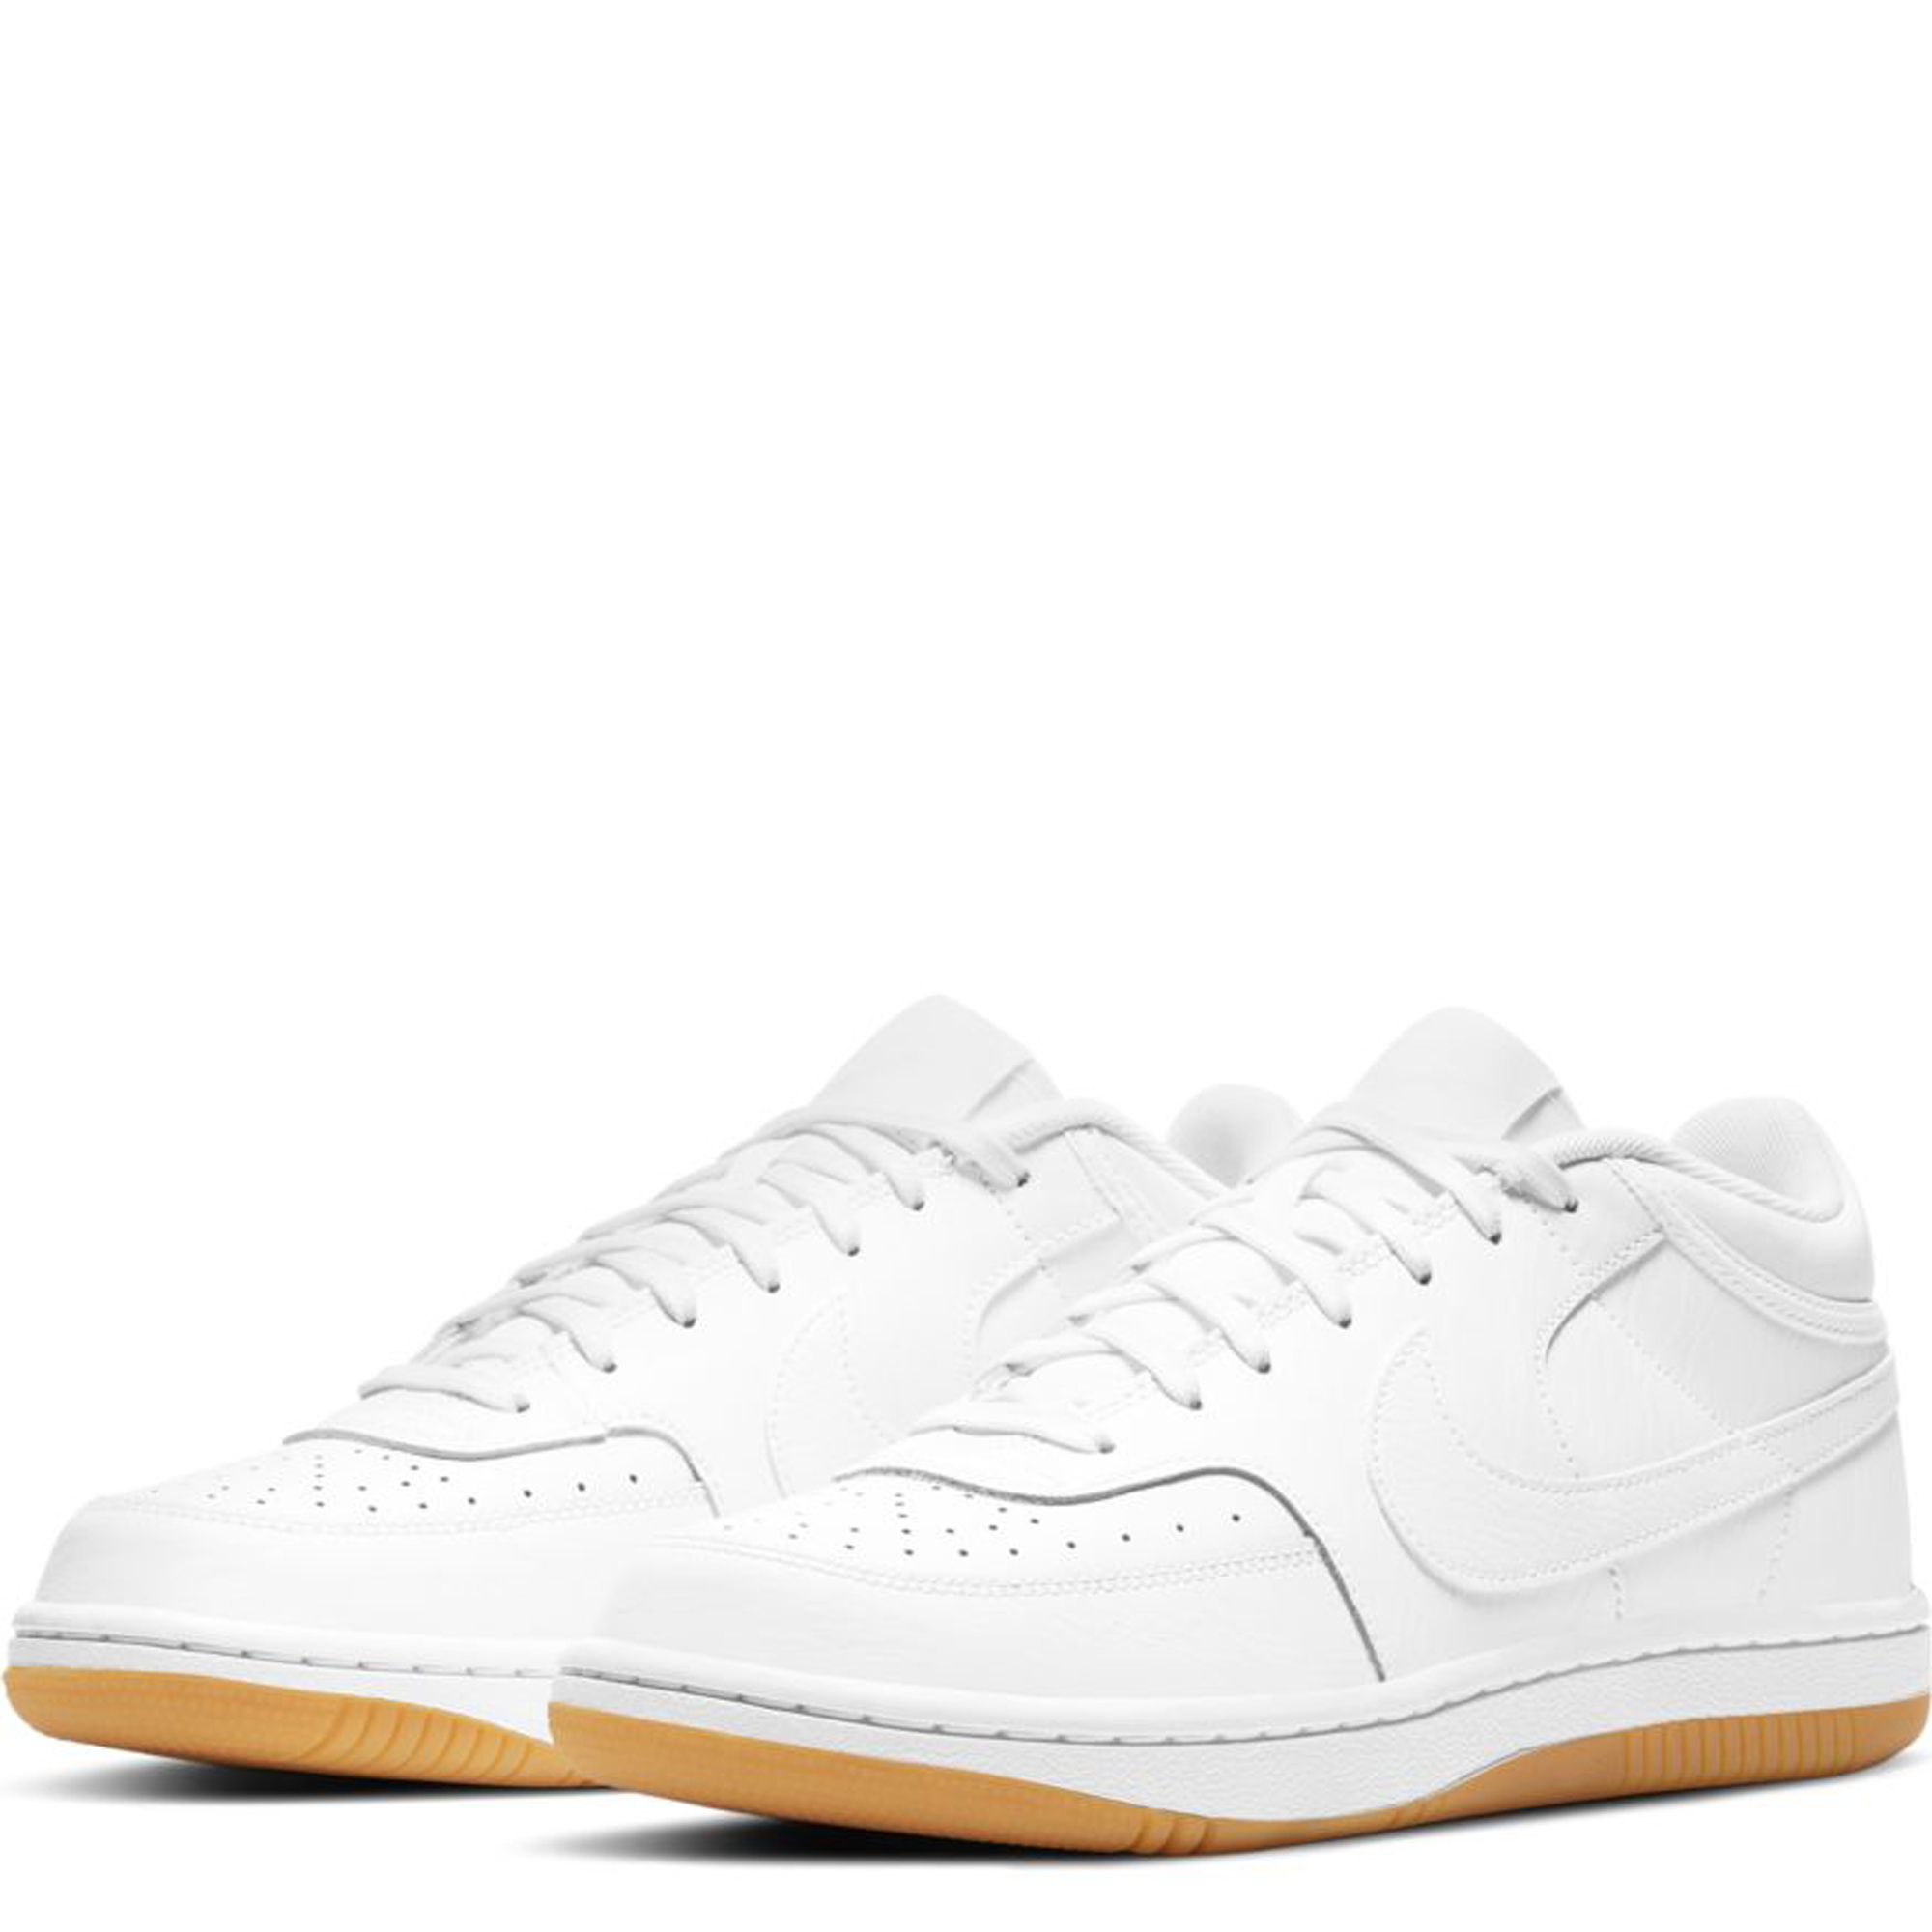 Nike Sky Force 3/4 White Gum DC1703-100 Release Date - SBD